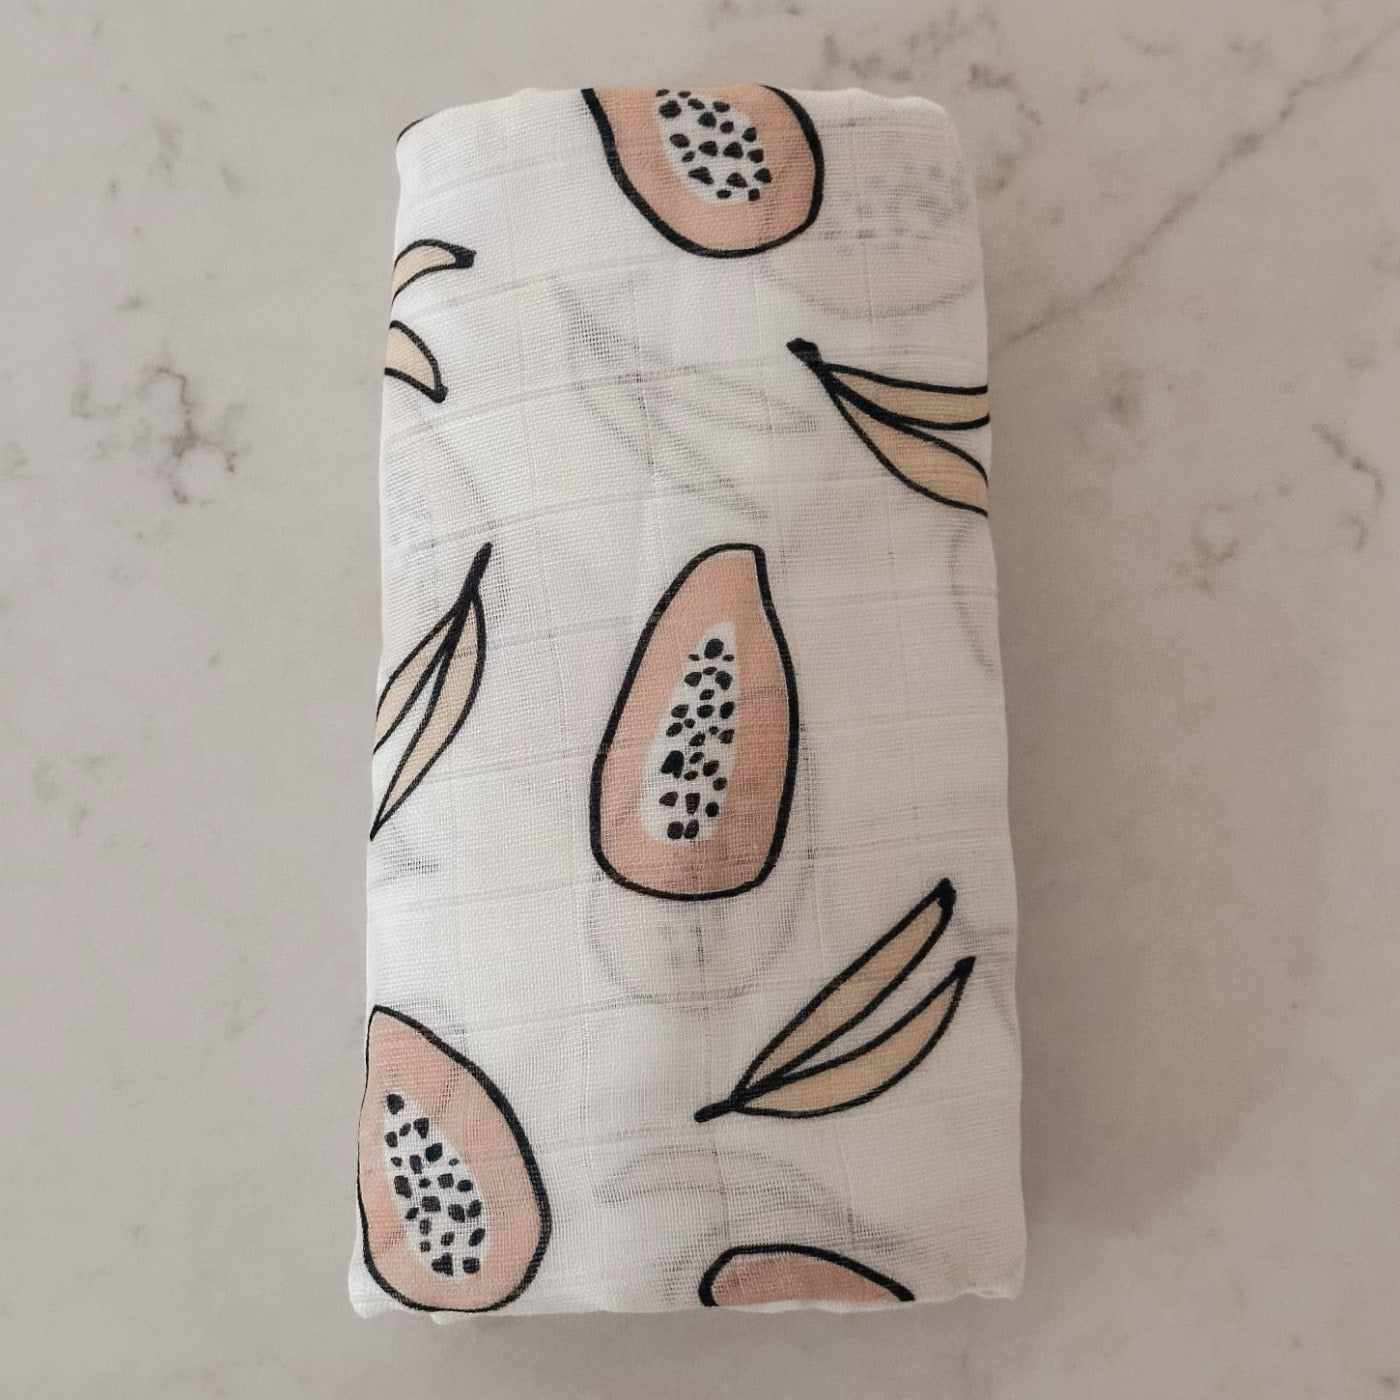 Fruit Salad Swaddle - Baby Swaddles & Wraps at Louie Meets Lola